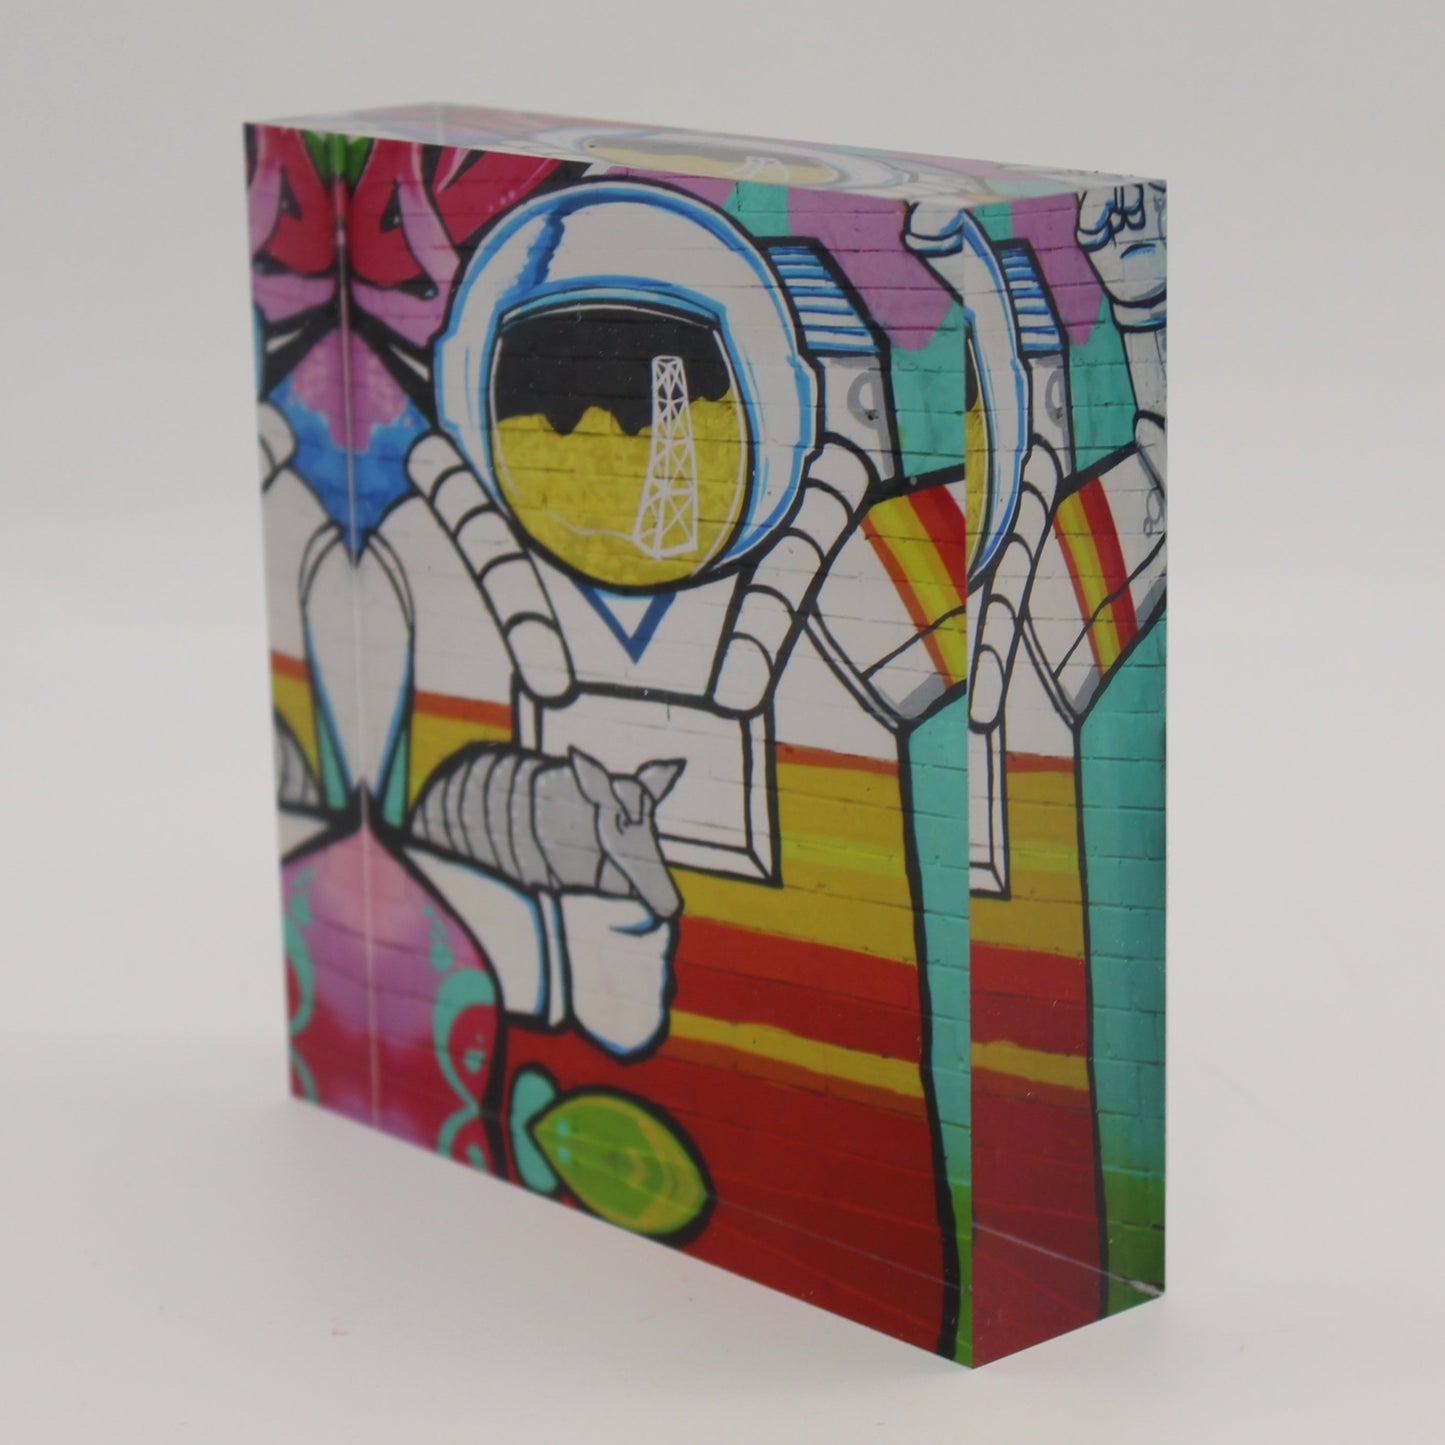 Tilted view of Acrylic block depicting astronaut holding an armadillo with an oil rig over face shield on the helmet